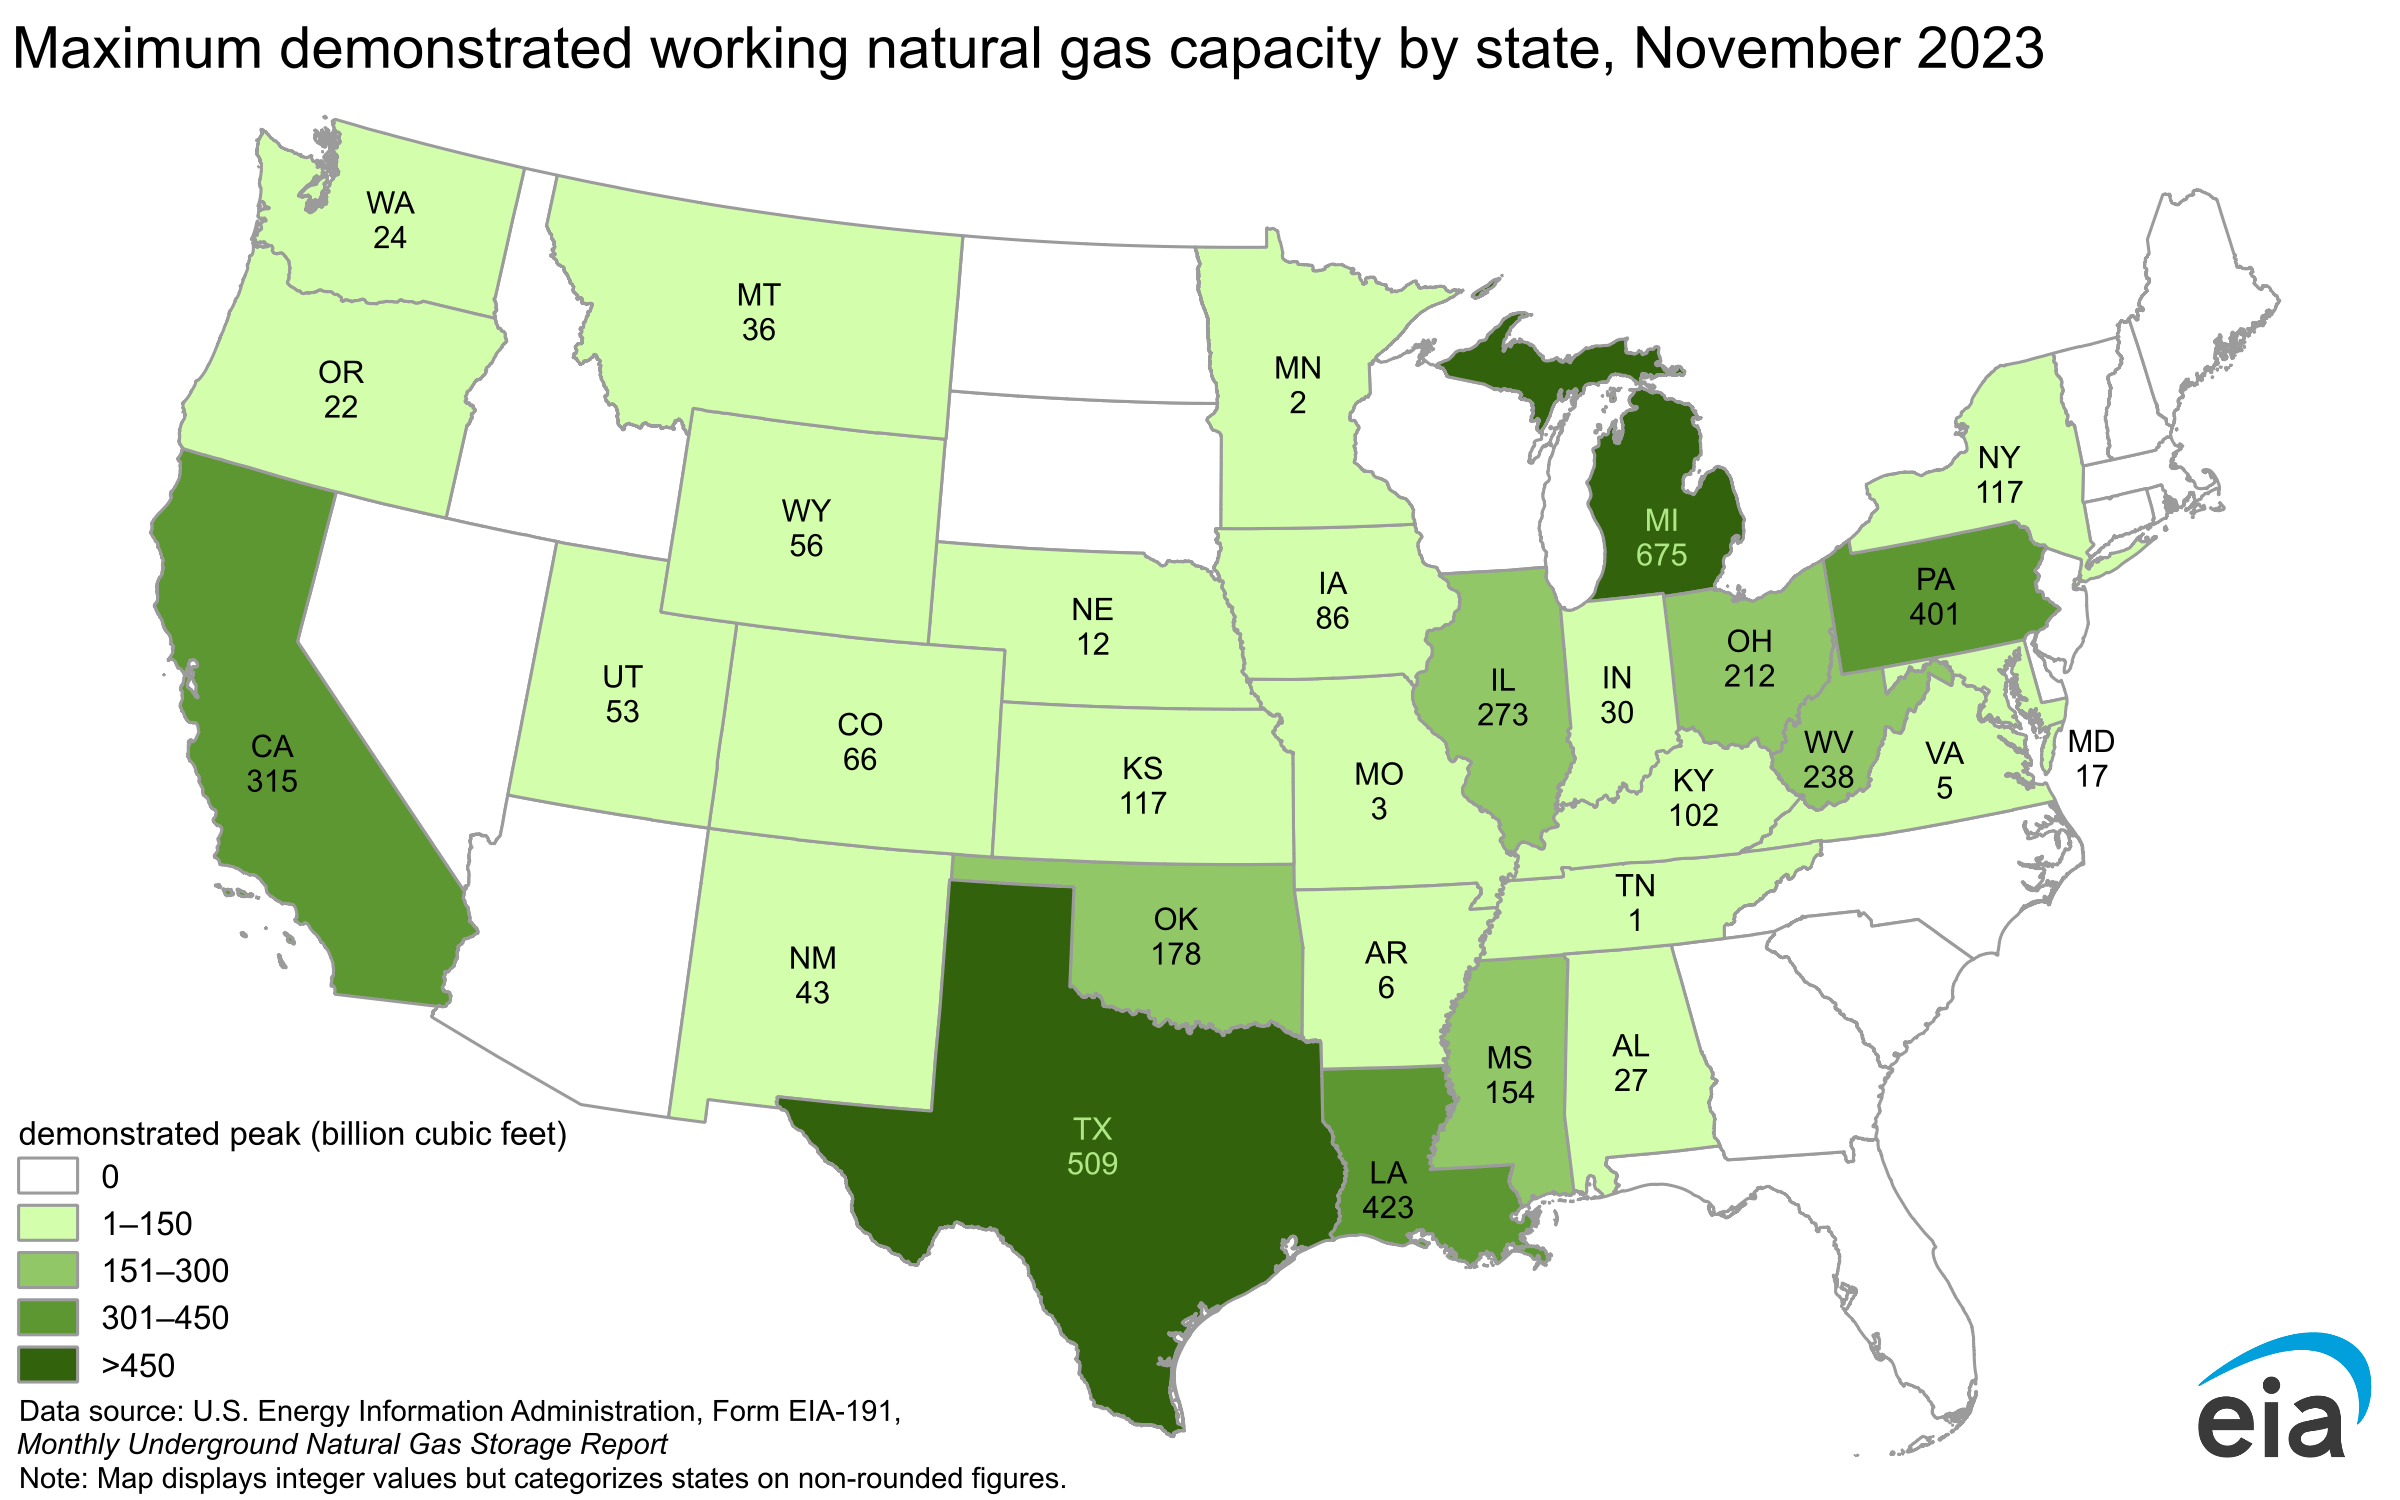 Maximum demonstrated working natural gas capacity by state, November 2020